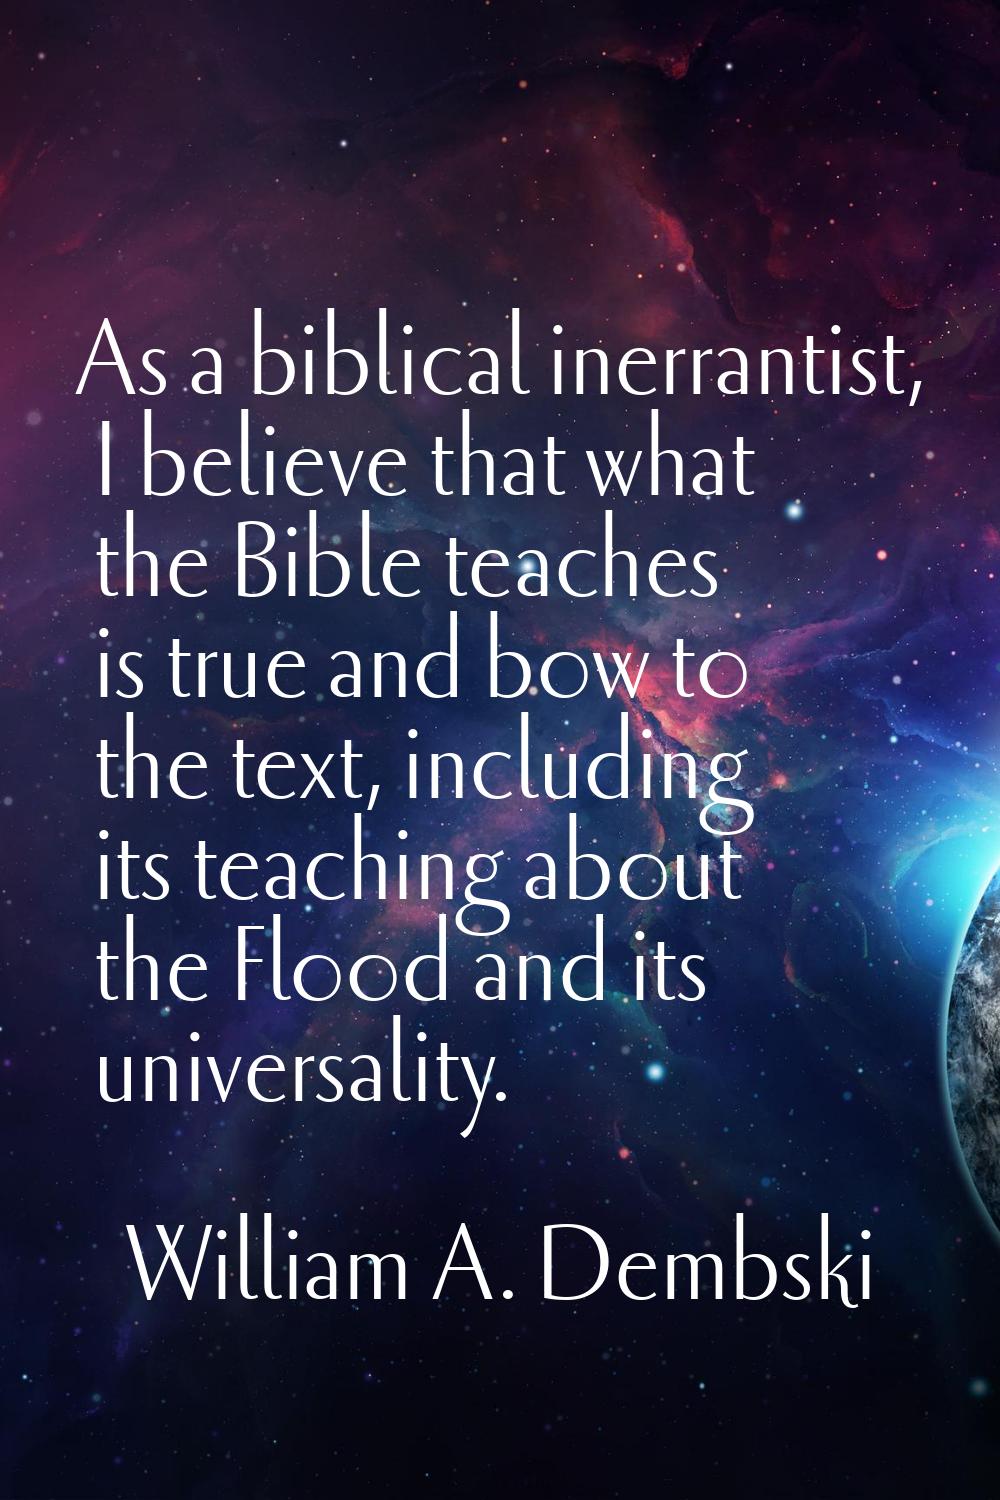 As a biblical inerrantist, I believe that what the Bible teaches is true and bow to the text, inclu